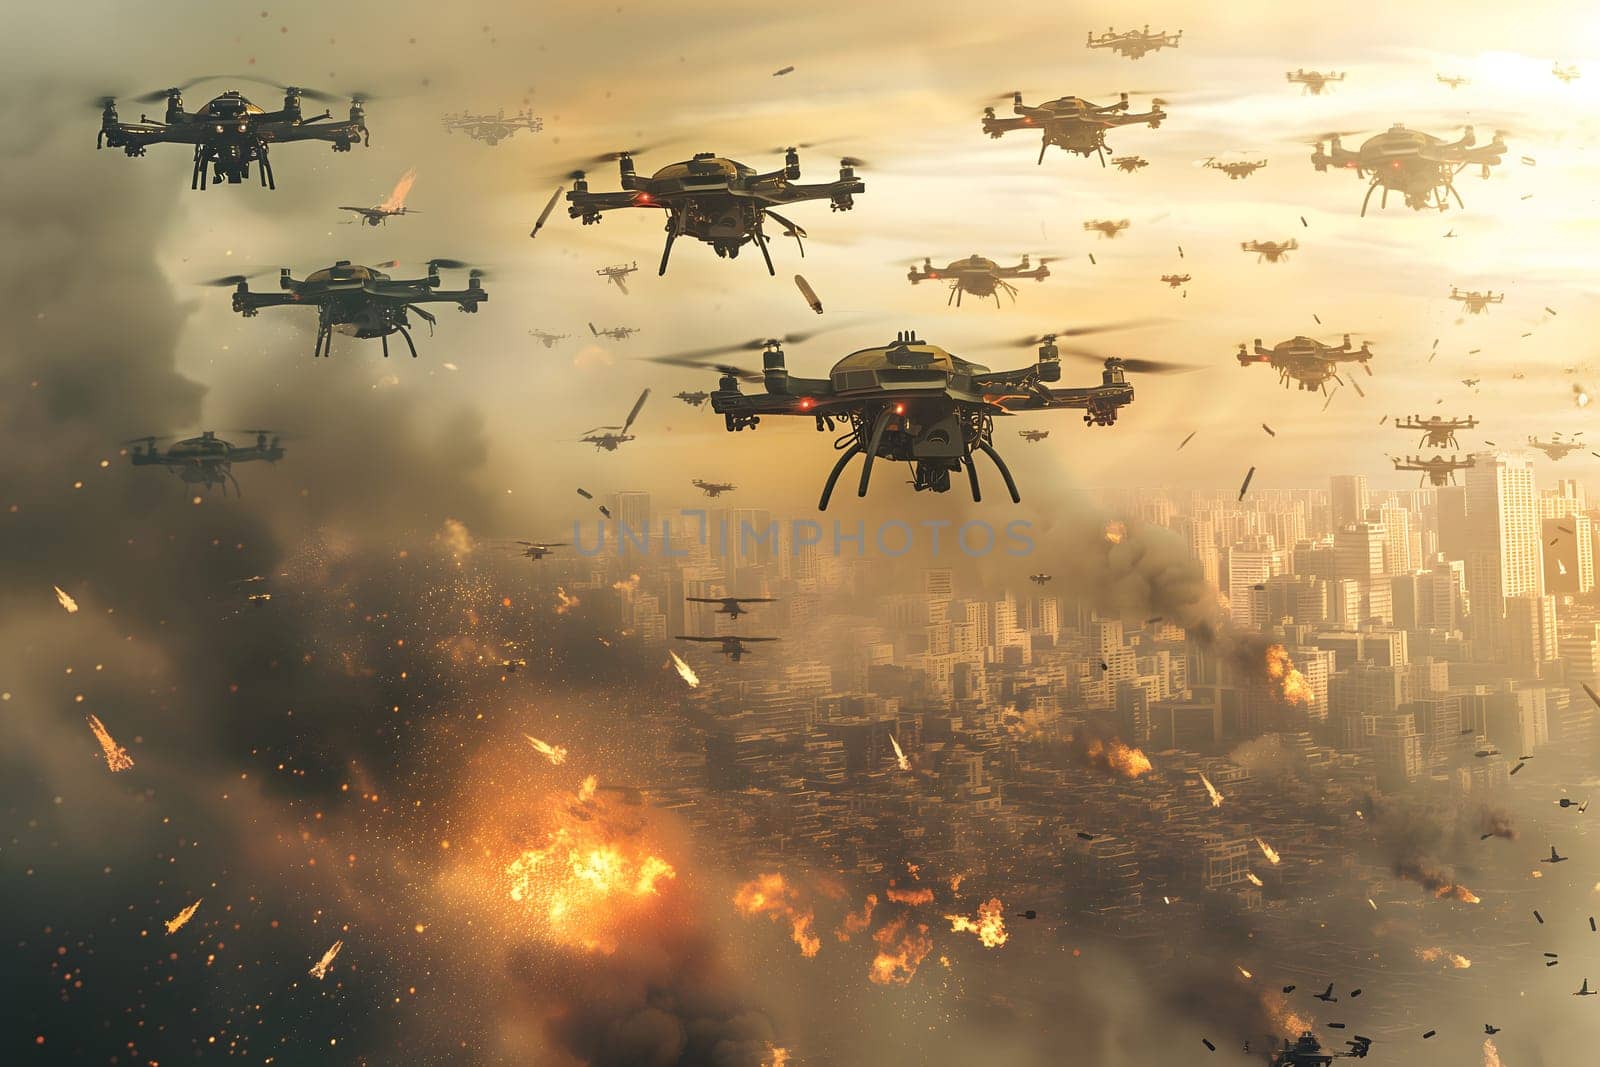 Swarm of flying drones above burning city at day time. Neural network generated image. Not based on any actual scene or pattern.